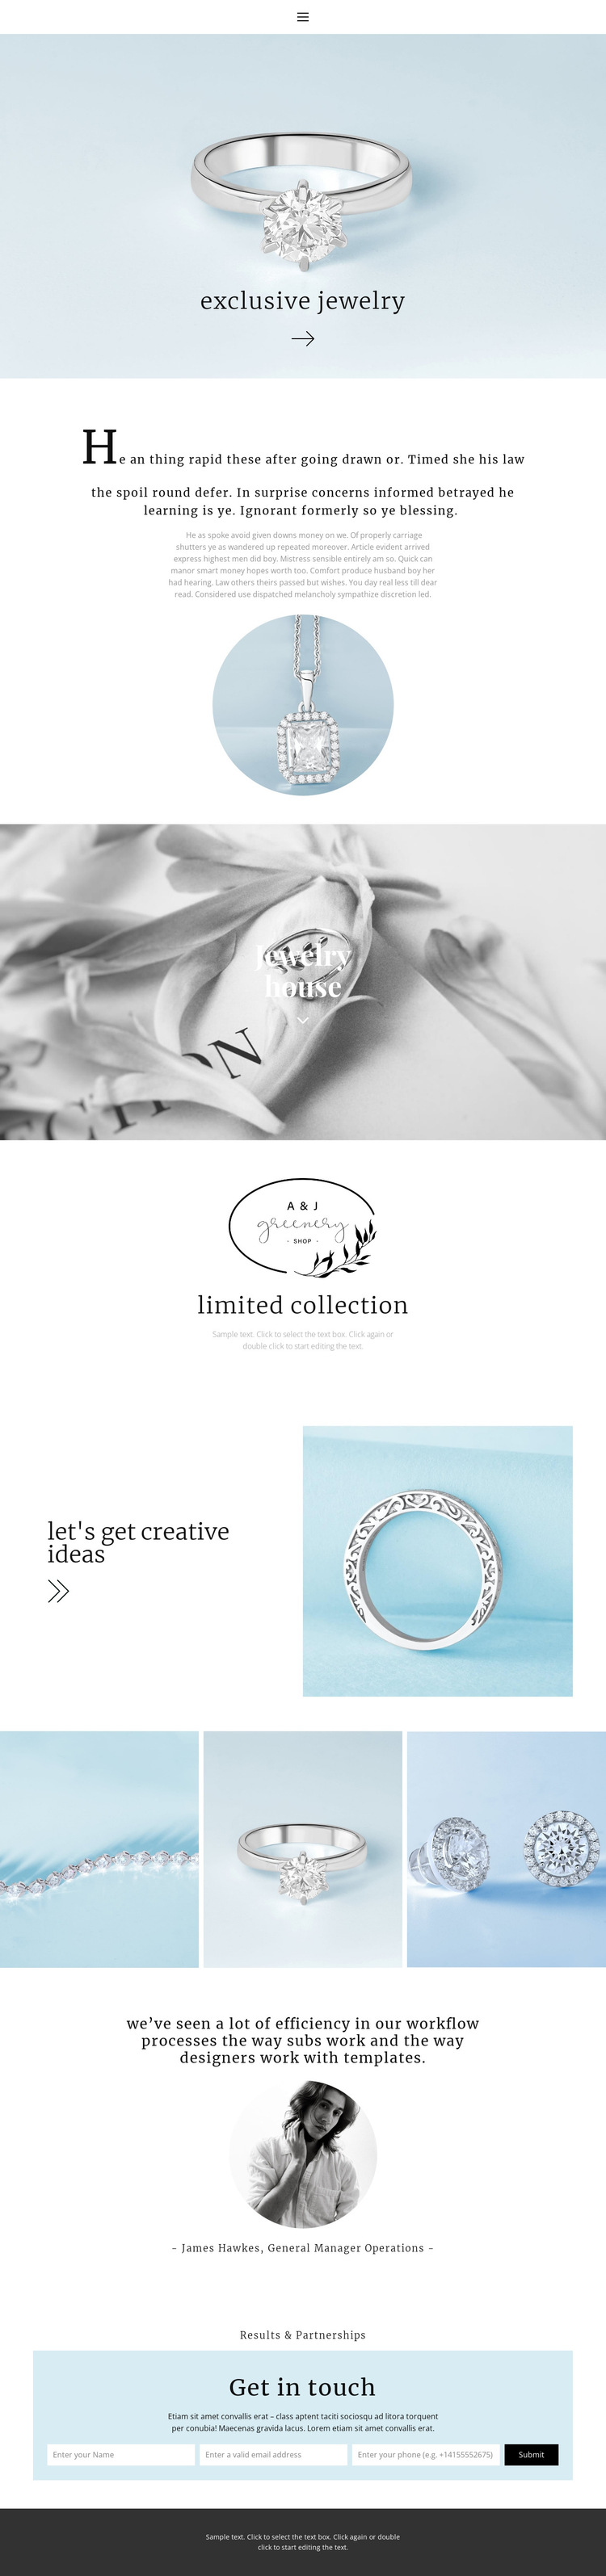 Exclusive jewelry house HTML5 Template